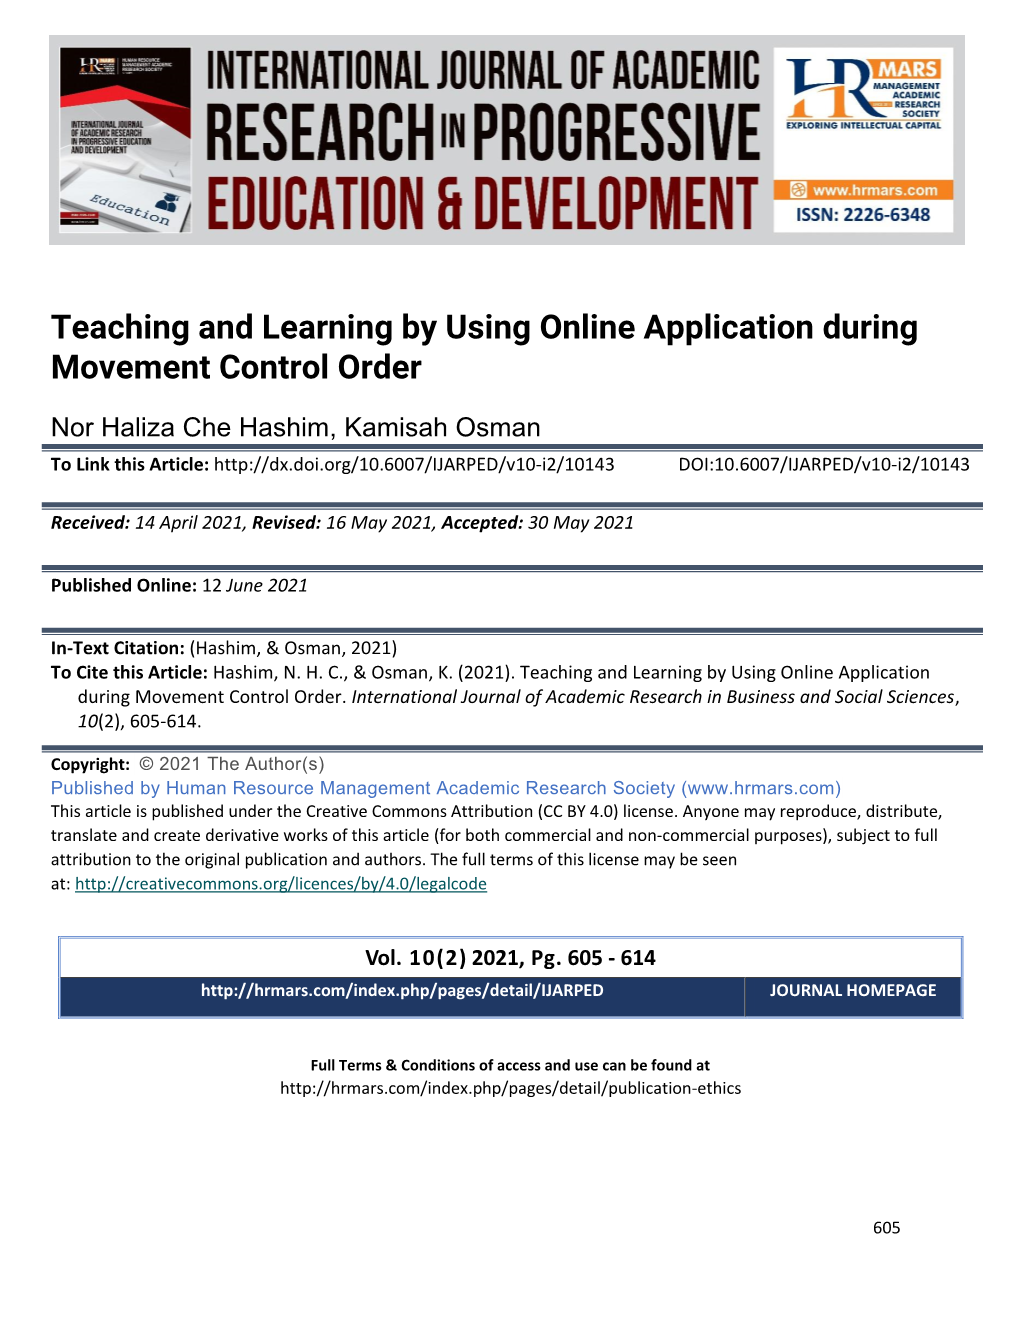 Teaching and Learning by Using Online Application During Movement Control Order